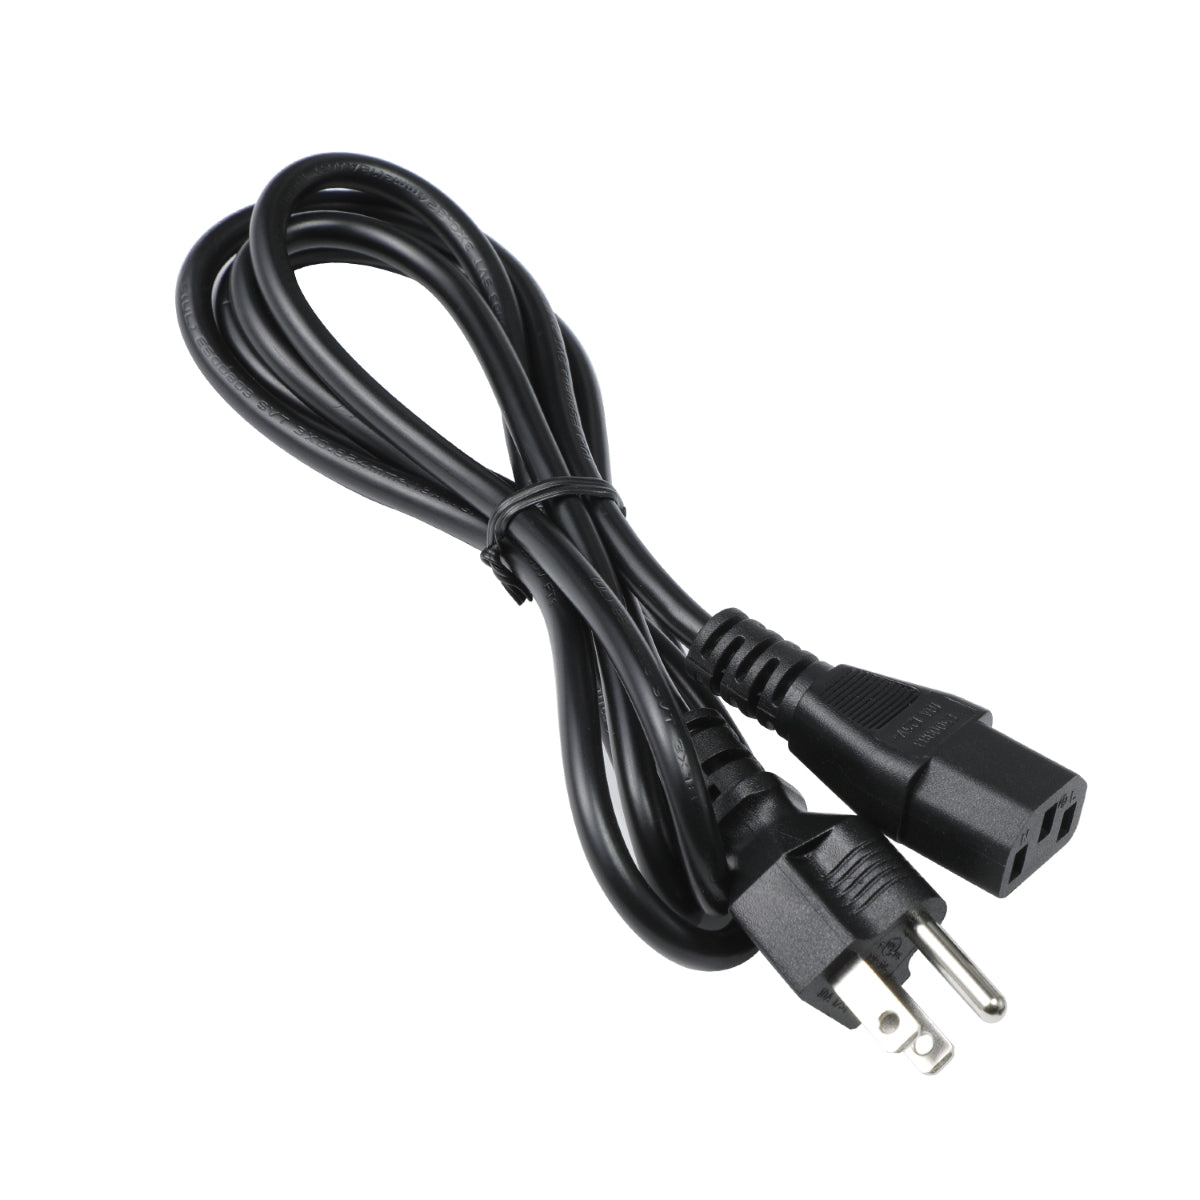 Power Cord for Samsung LS27A600NWNXGO Monitor TV.